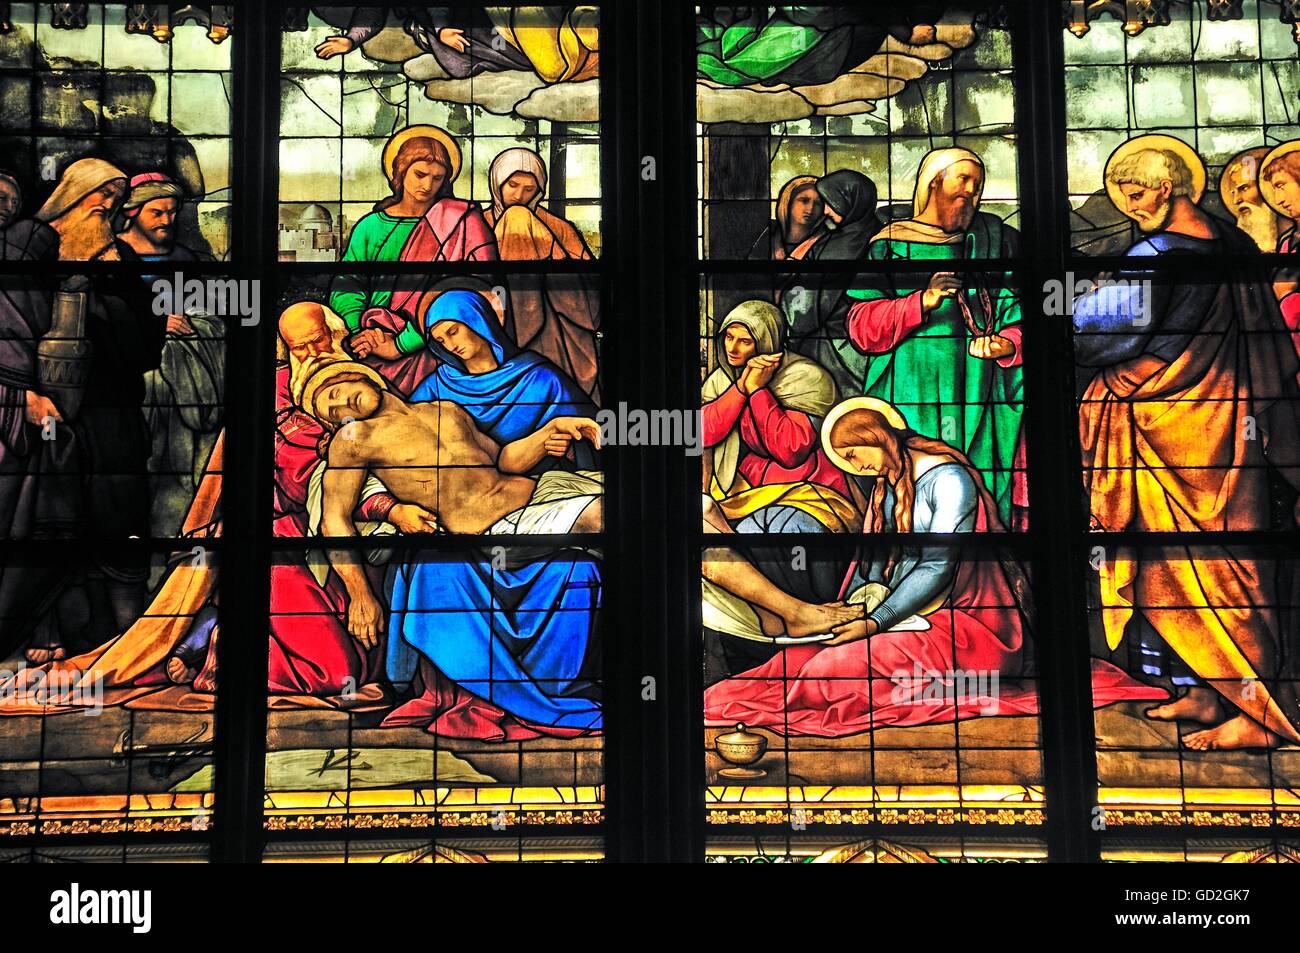 religion, Christianity, Jesus Christ, lamentation of Christ, lamentation window in the Cologne cathedral, Cologne, North Rhine-Westphalia, Germany, religious art, church window, church windows, suffer, life of suffering, passion, stained-glass window, biblical scene, biblical scenes, biblical story, biblical stories, Christian faith, Christianity, religion, religions, history of suffering, martyrdom, torture, ordeal, thorn way, Path to Crucifixion, pain, pains, historic, historical, man, men, male, woman, women, female, people, Additional-Rights-Clearences-Not Available Stock Photo